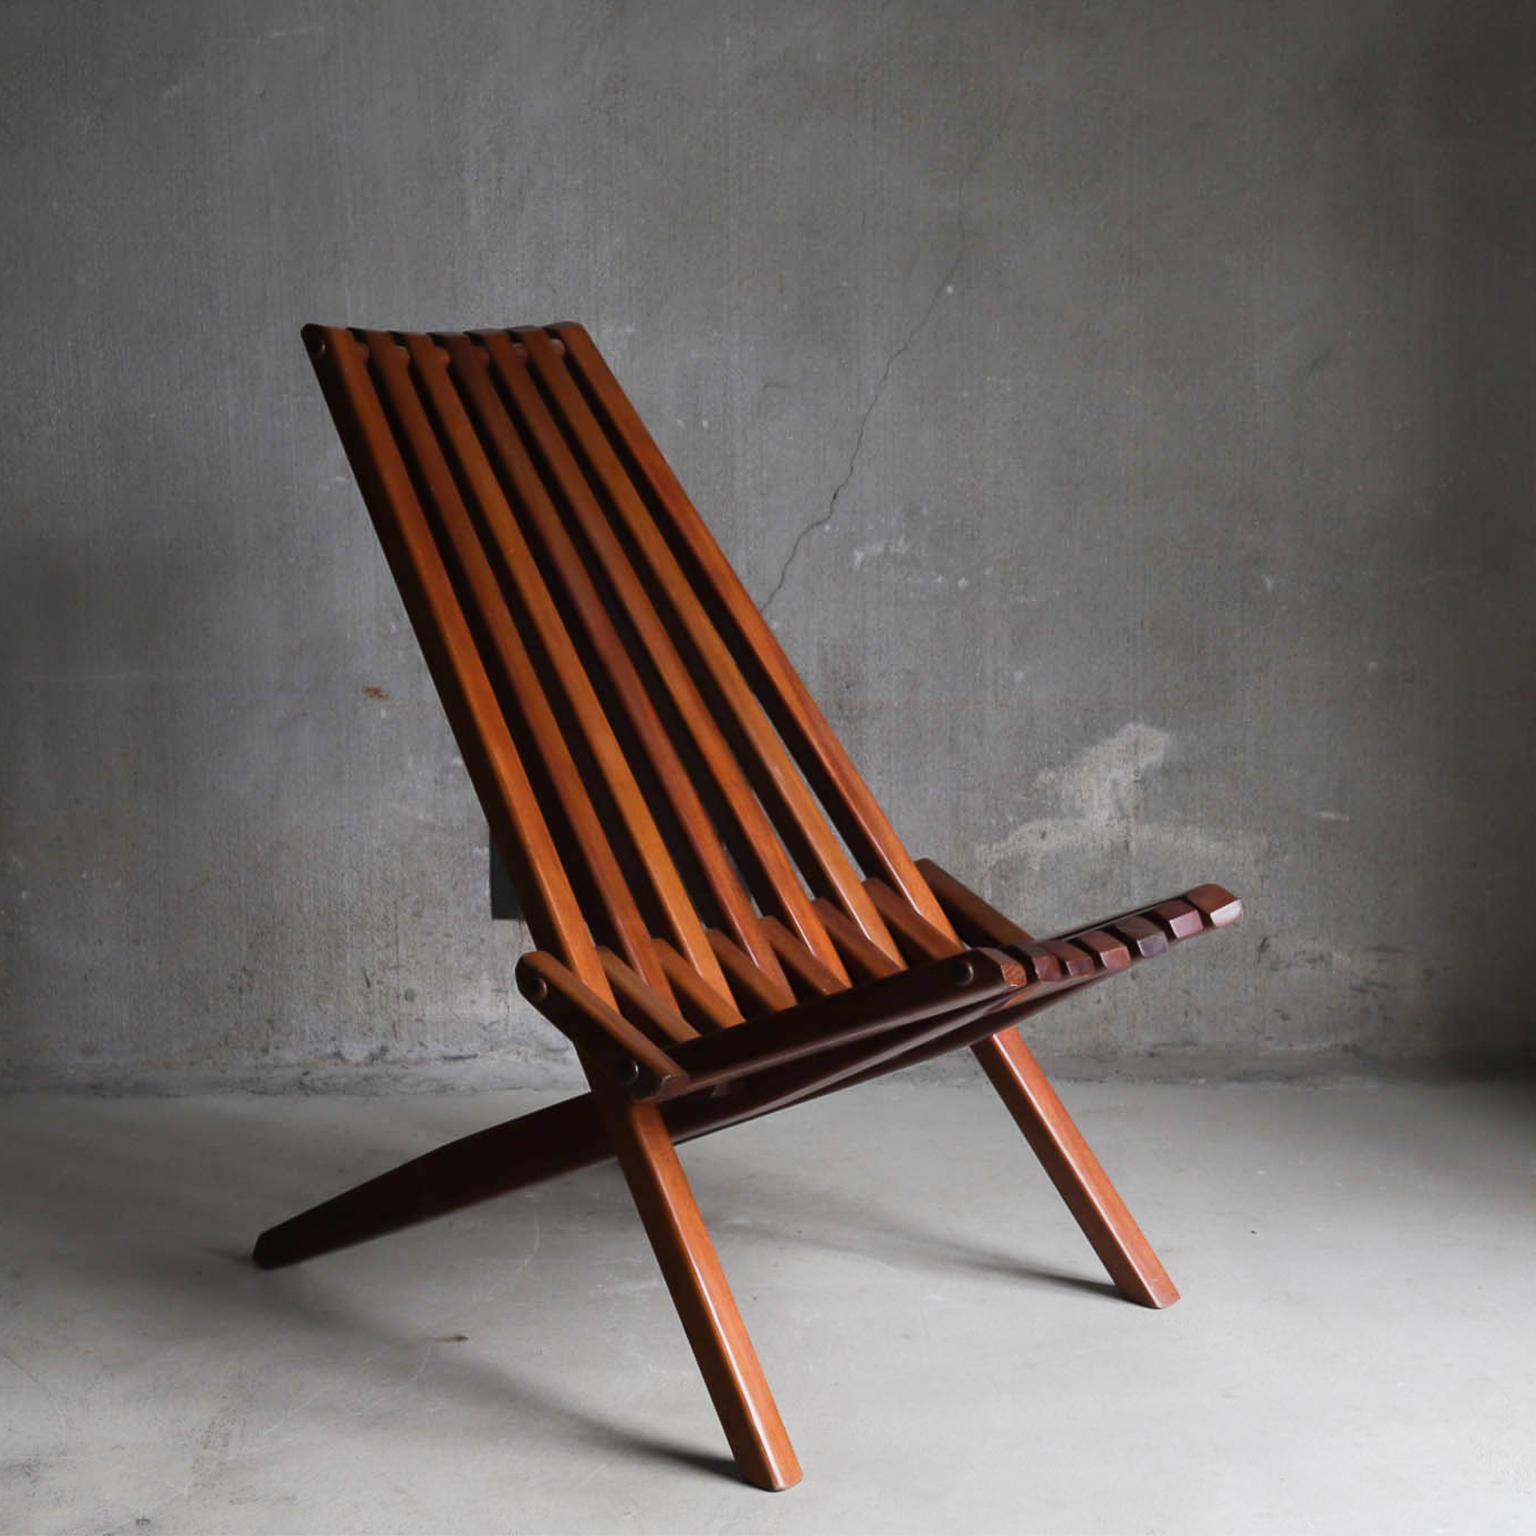 Panamericana chair manufactured in Denmark.
Made from precious mahogany wood.